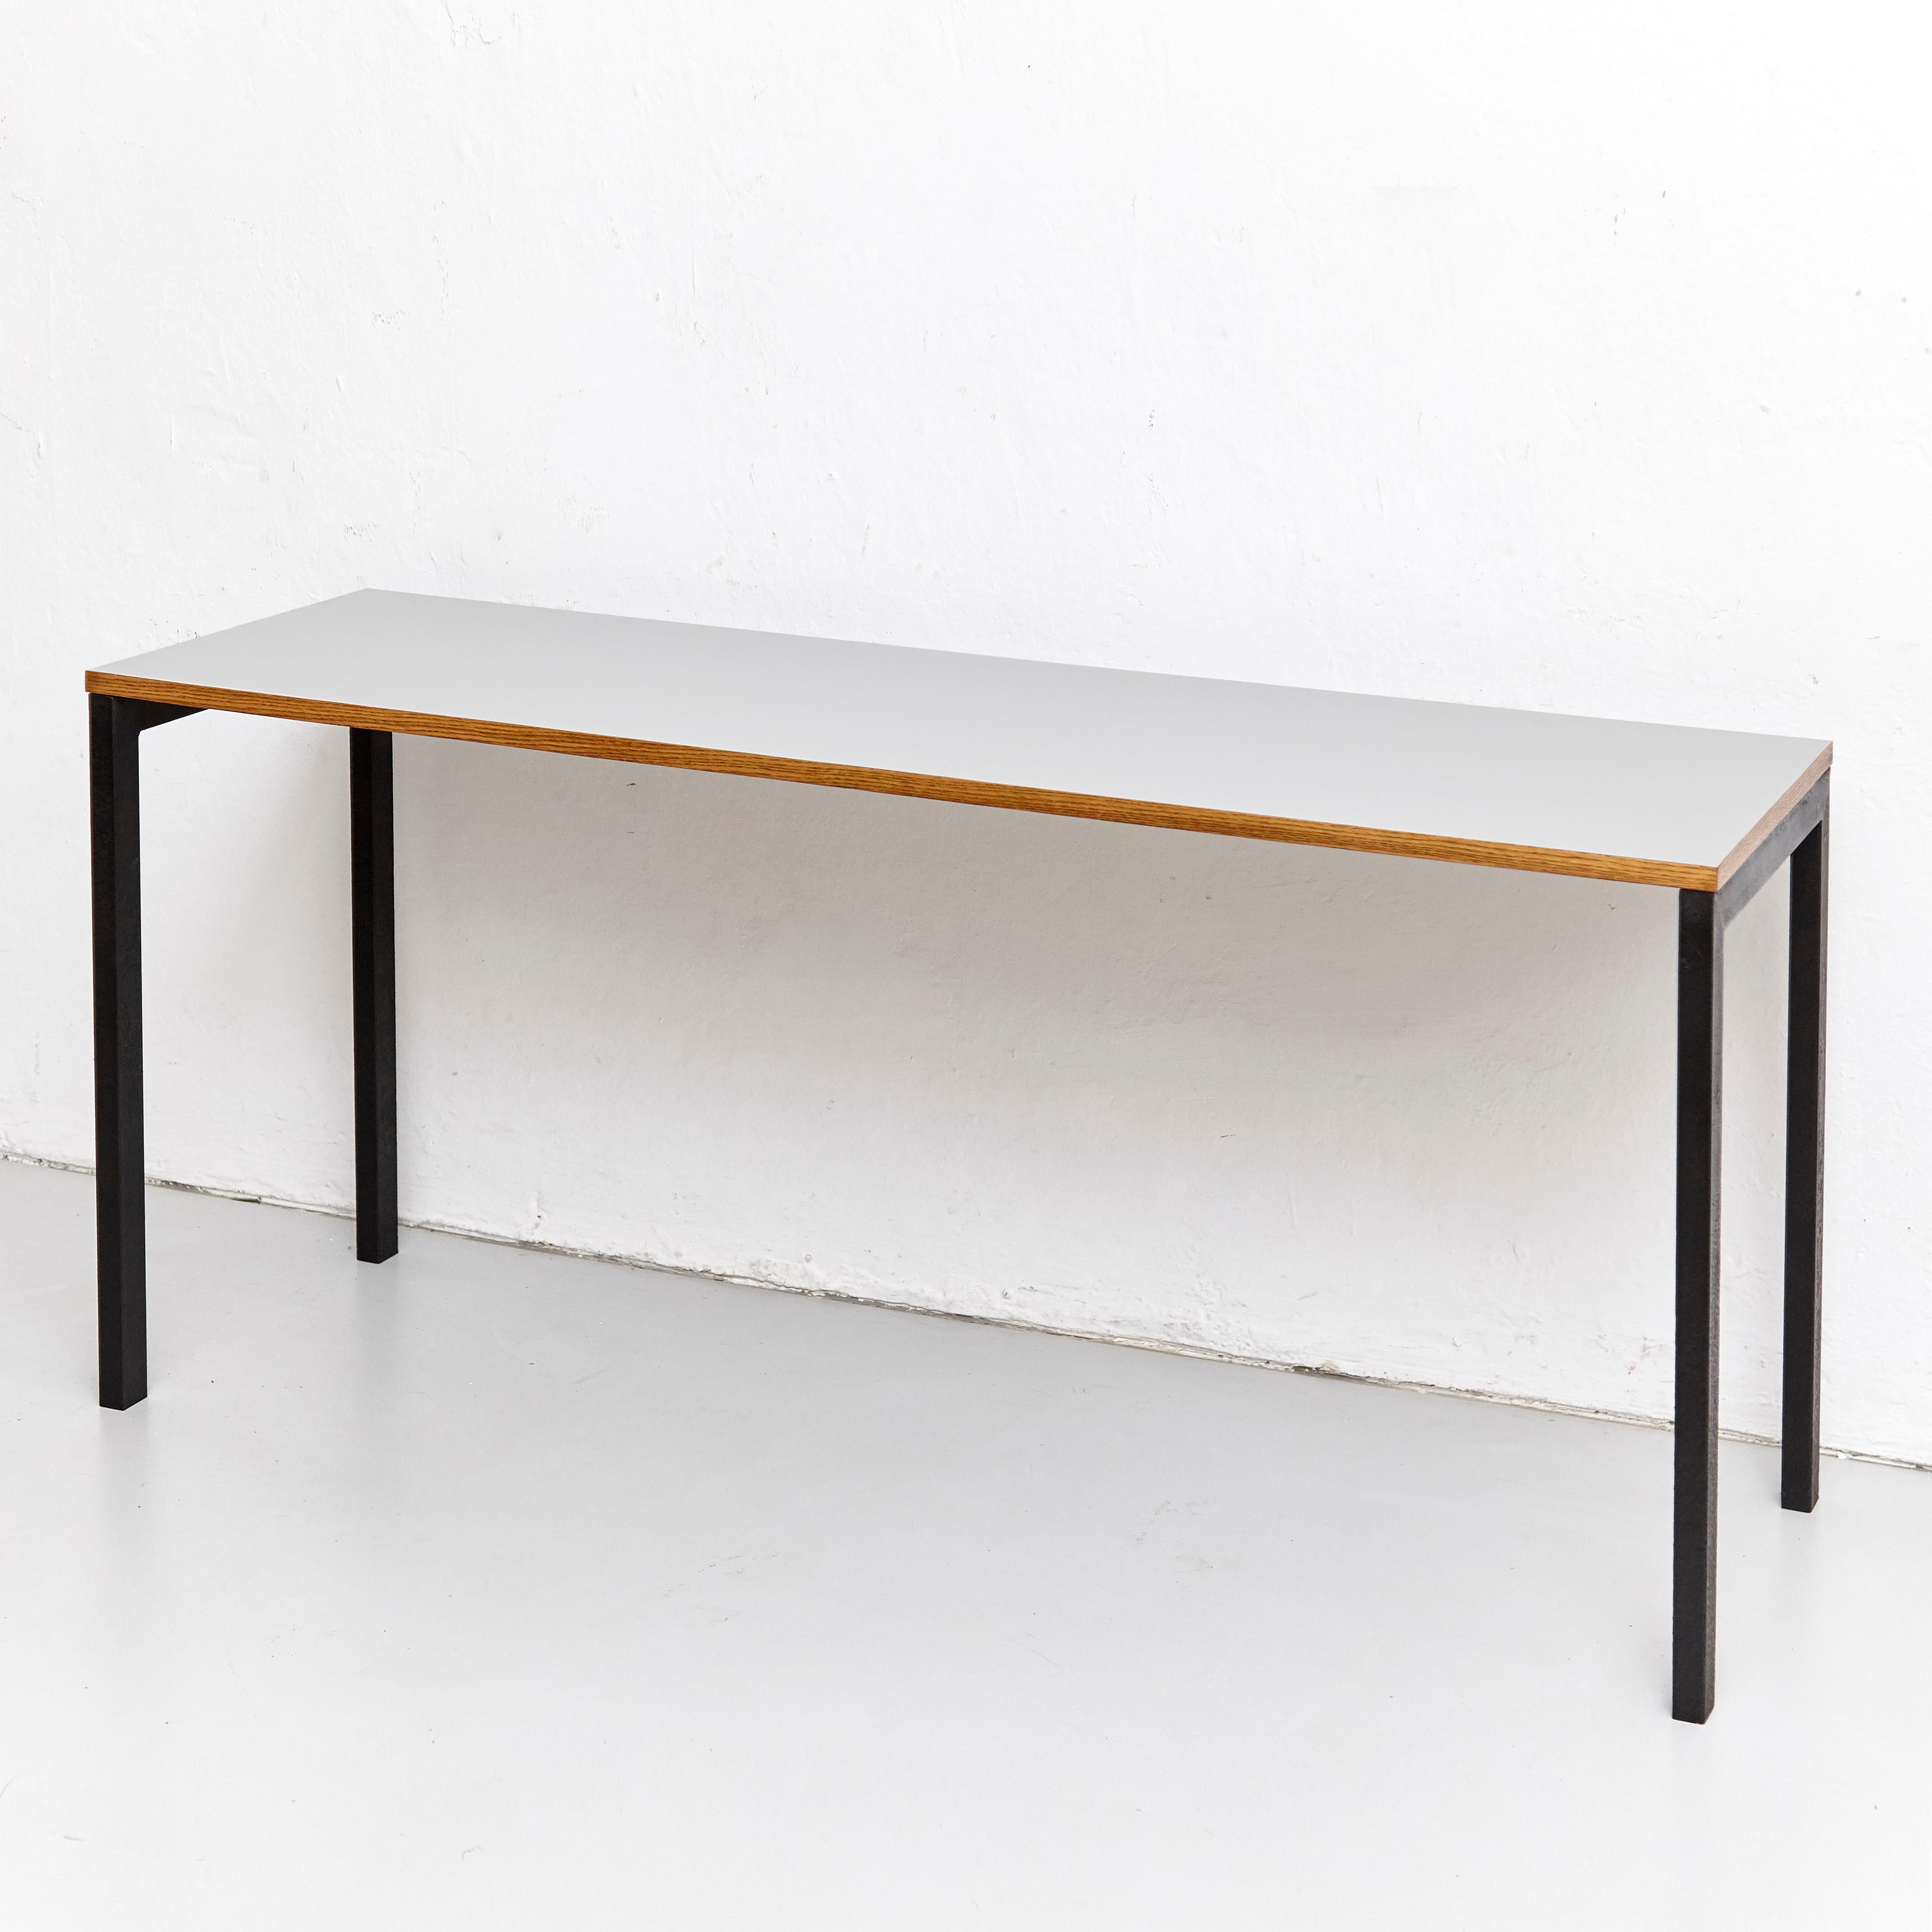 Console designed by Charlotte Perriand, circa 1950.
Manufactured in France, circa 1950.
Black laminated plastic-covered plywood, painted steel.

In good original condition, with minor wear consistent with age and use, preserving a beautiful